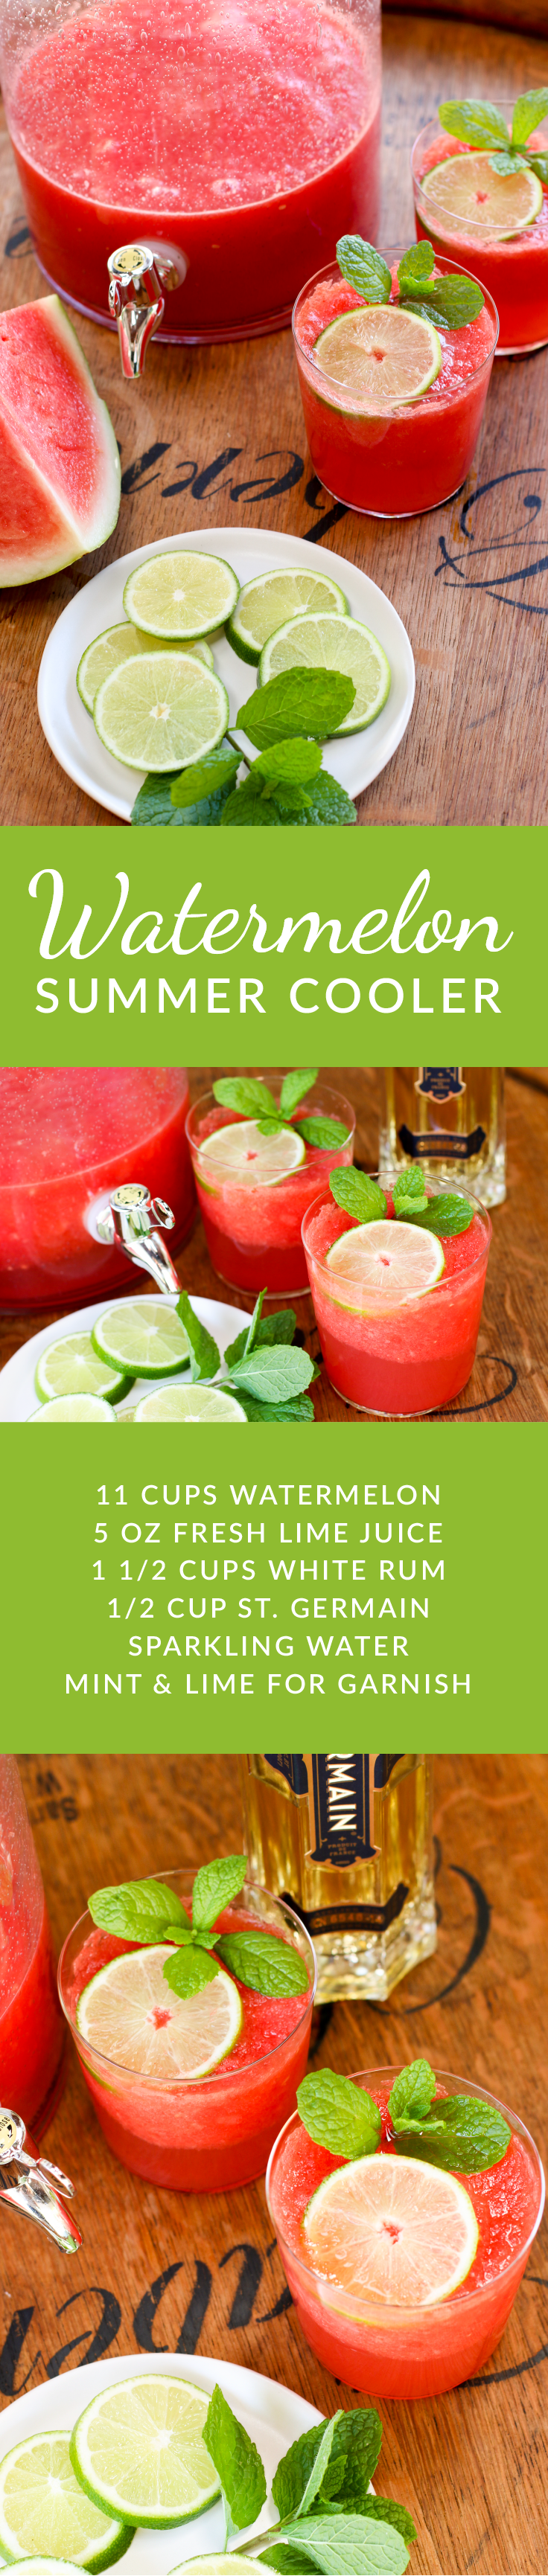 This watermelon cooler is made from pureed watermelon, fresh lime juice, white rum, St. Germain and topped with sparkling water. Make a big batch for your next barbecue.